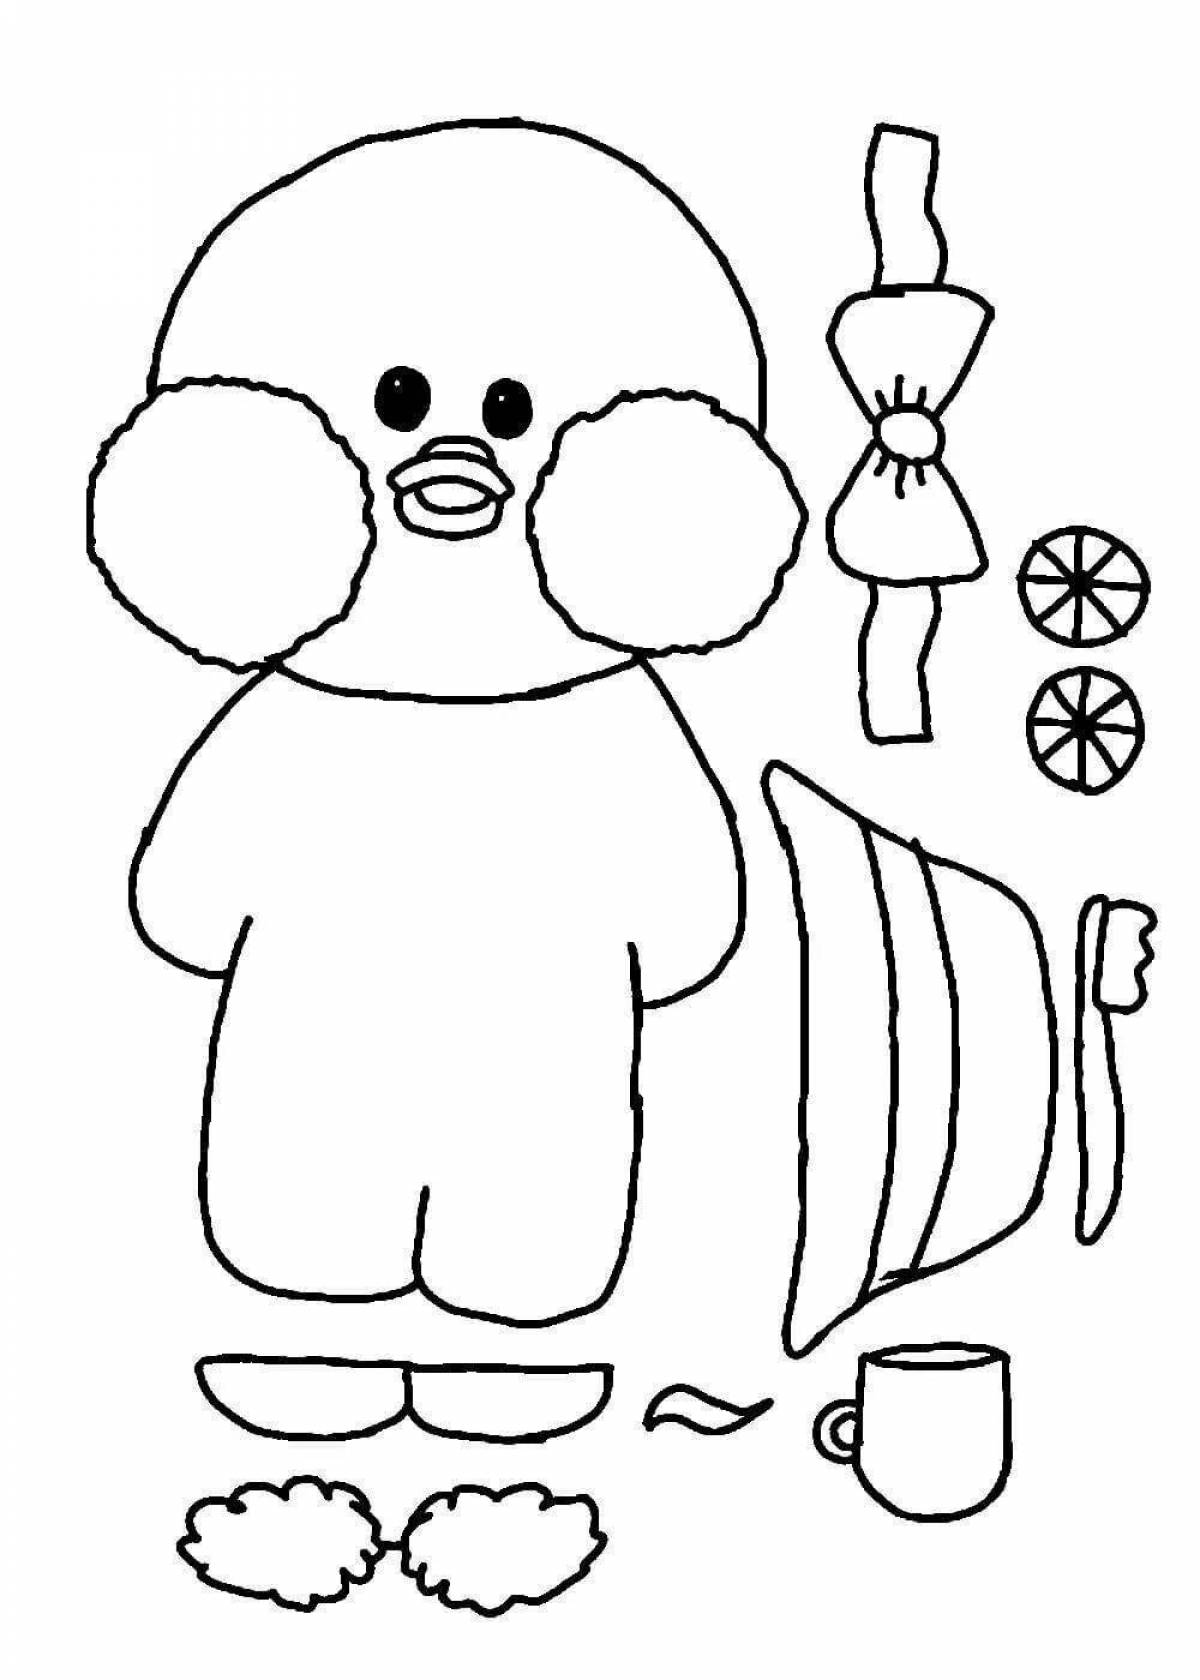 Colored crazy duck lalanfant coloring page